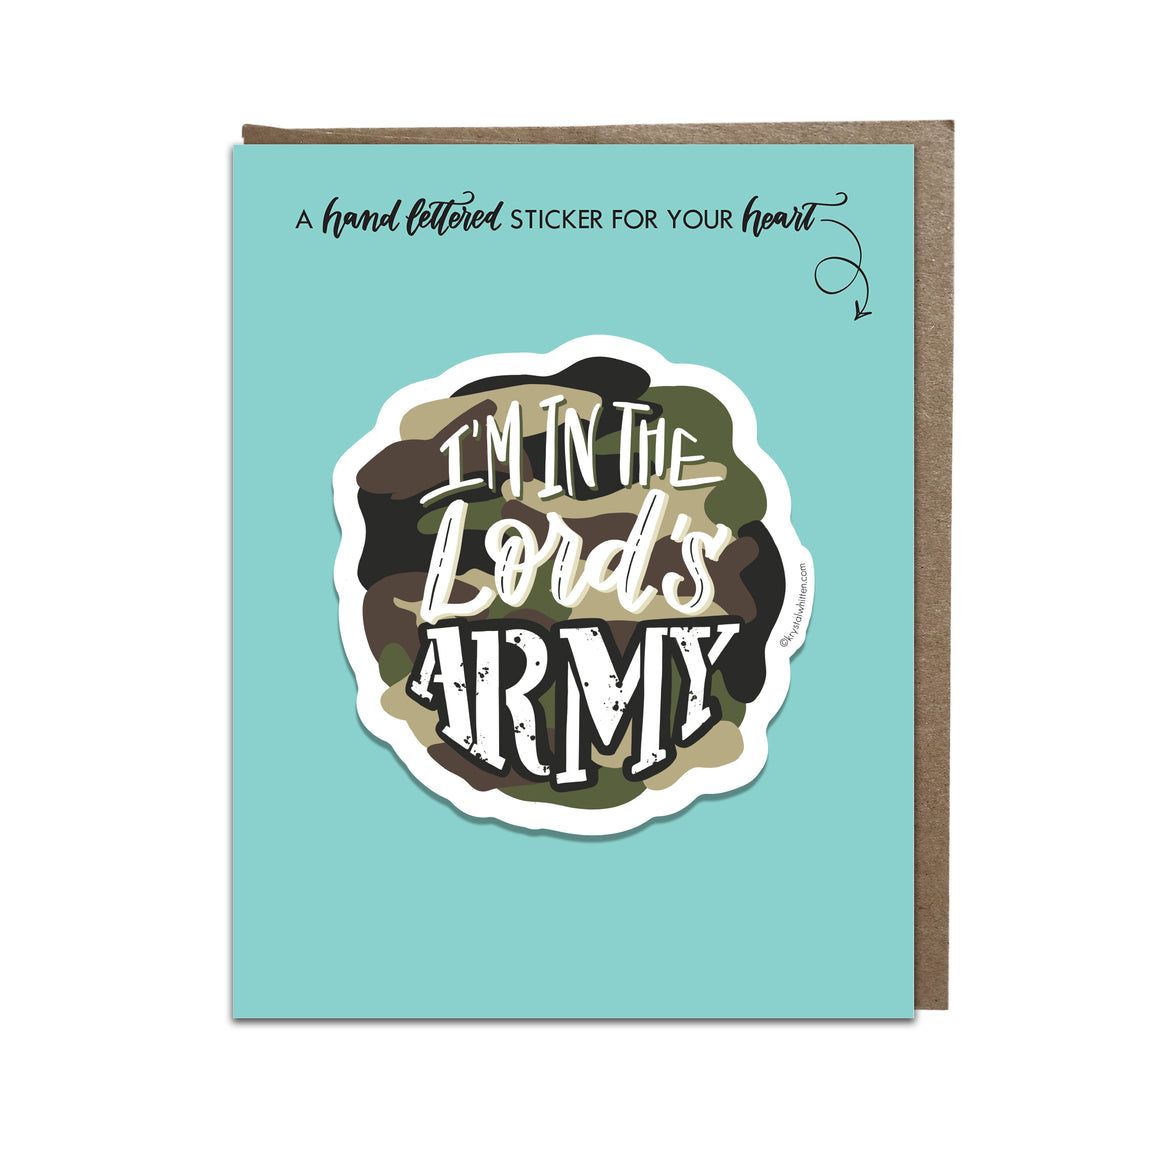 "Lord's Army" sticker card